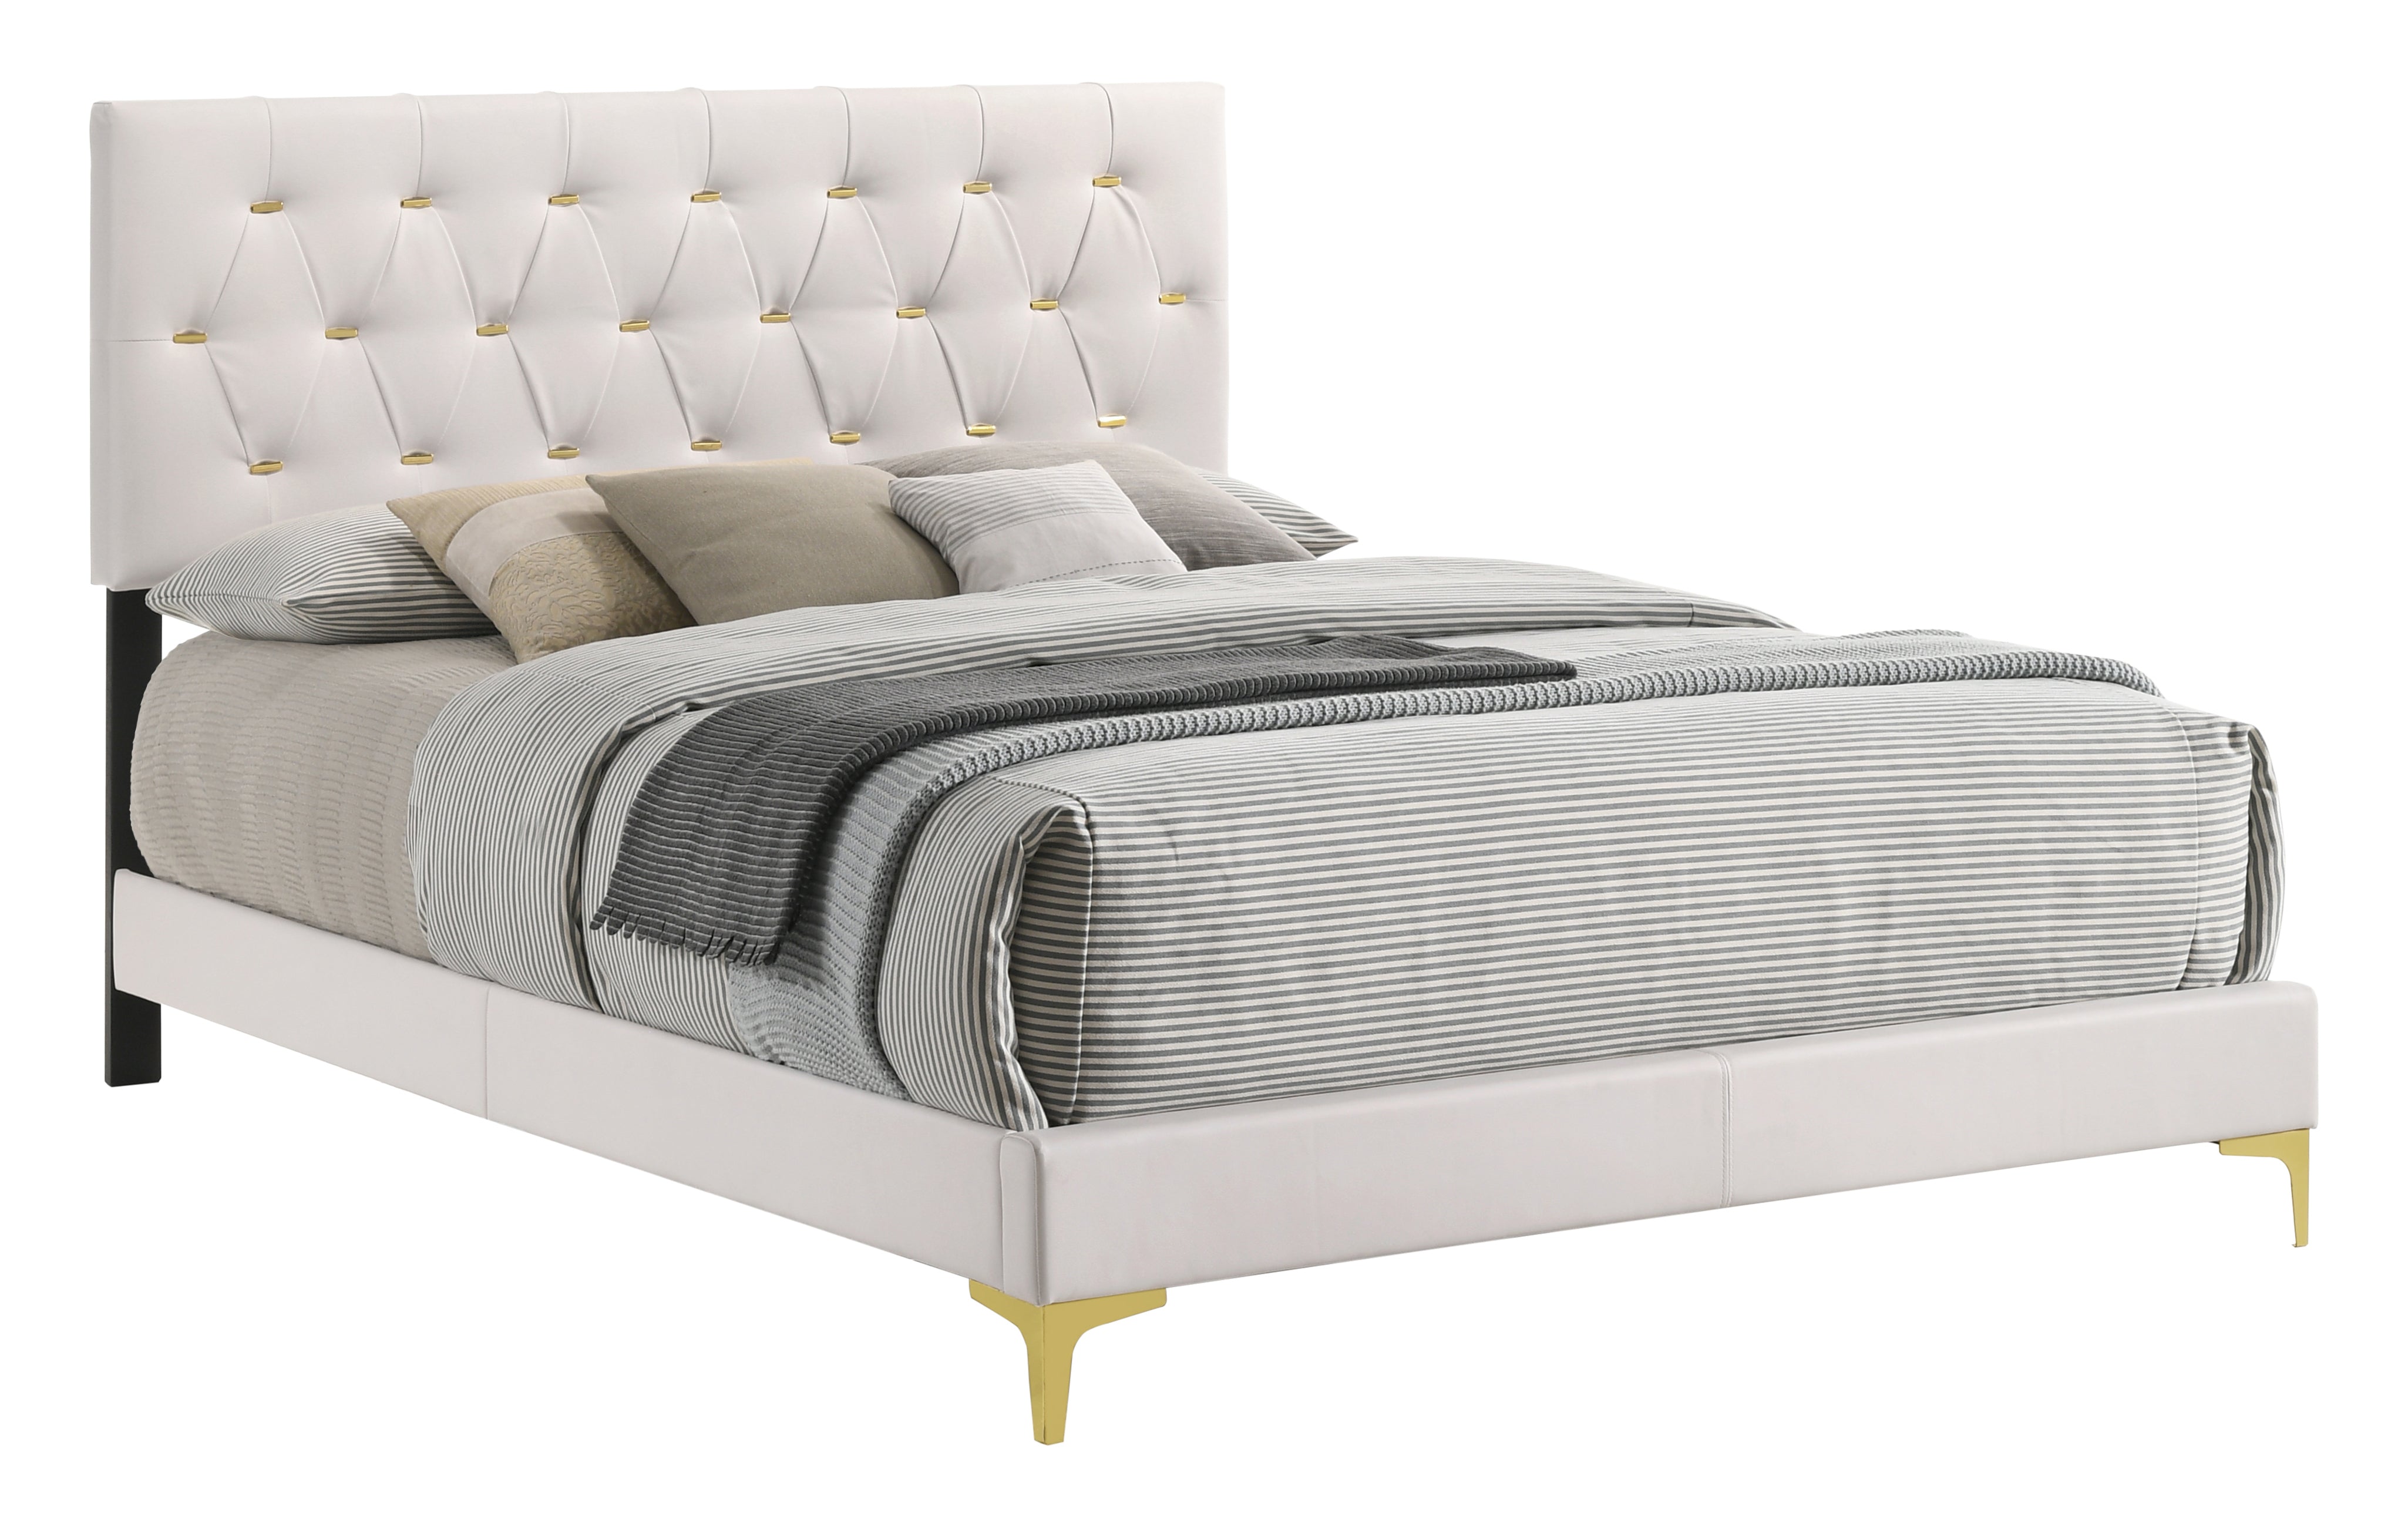 Kendall Tufted Upholstered Panel Bed in White